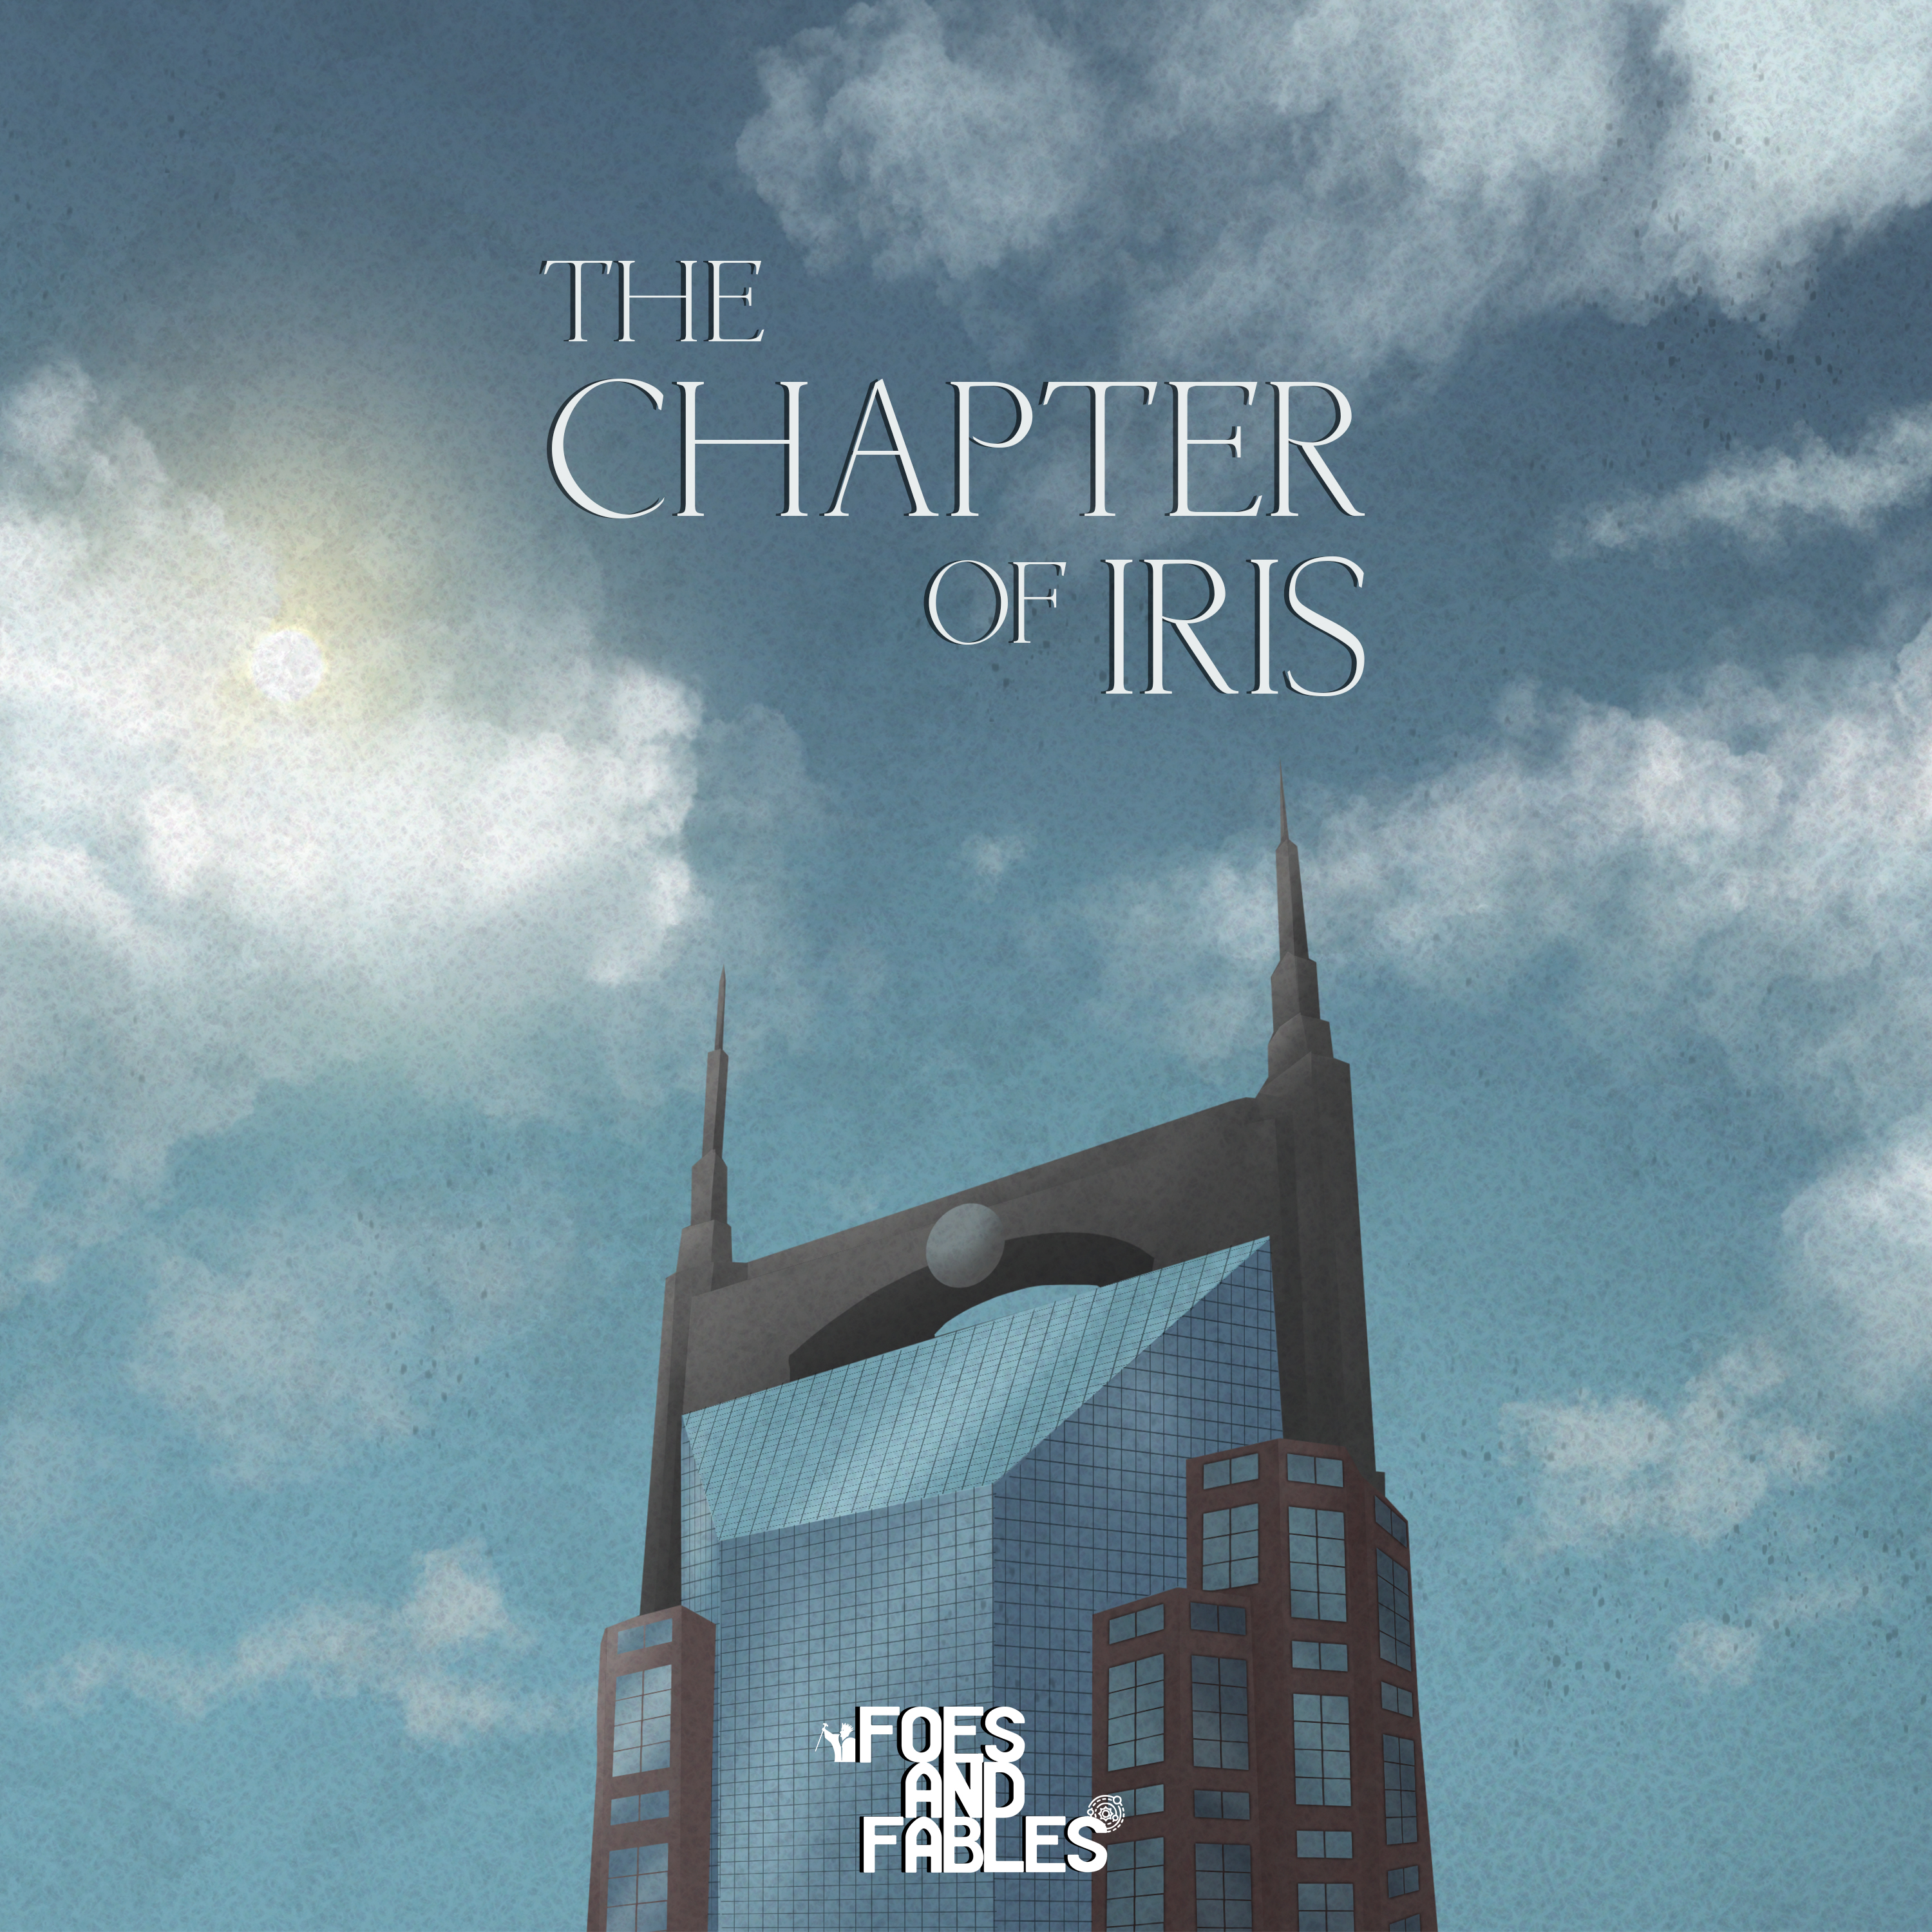 14. The Division of Trust | The Chapter of Iris